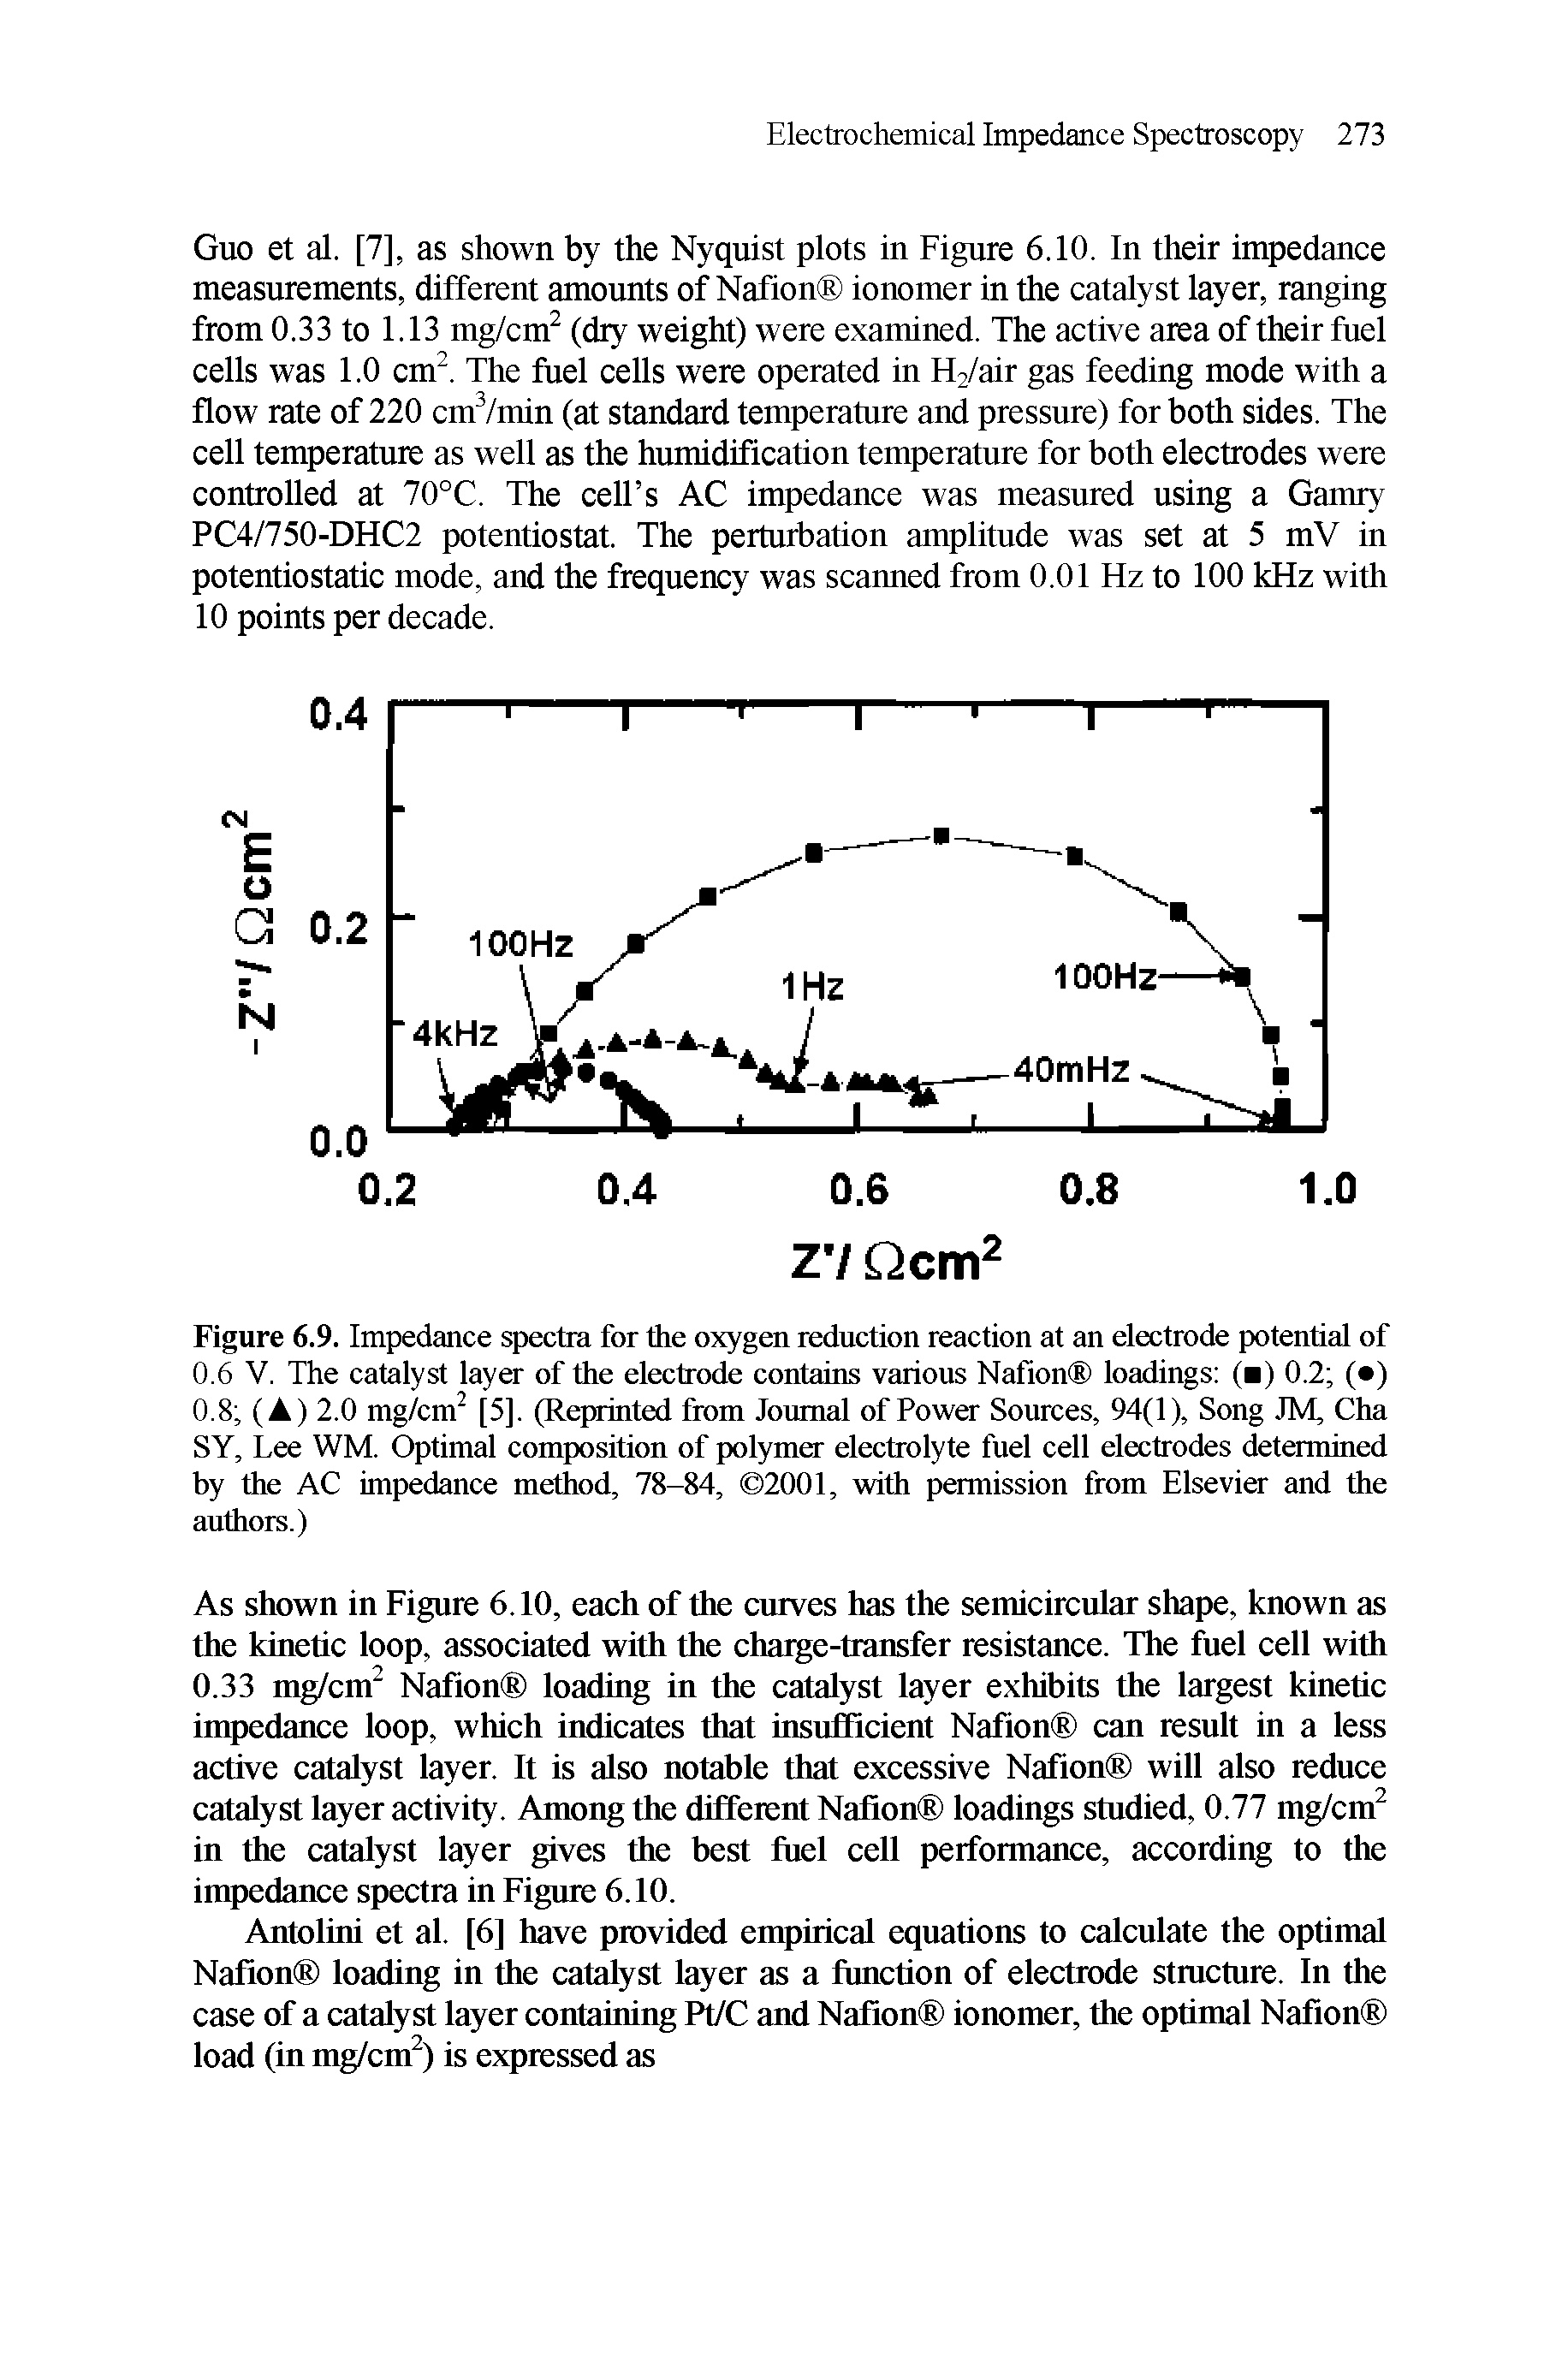 Figure 6.9. Impedance spectra for the oxygen reduction reaction at an electrode potential of 0.6 V. The catalyst layer of the electrode contains various Nafion loadings ( ) 0.2 ( ) 0.8 (A) 2.0 mg/cm2 [5], (Reprinted from Journal of Power Sources, 94(1), Song JM, Cha SY, Lee WM. Optimal composition of polymer electrolyte fuel cell electrodes determined by the AC impedance method, 78-84, 2001, with permission from Elsevier and the authors.)...